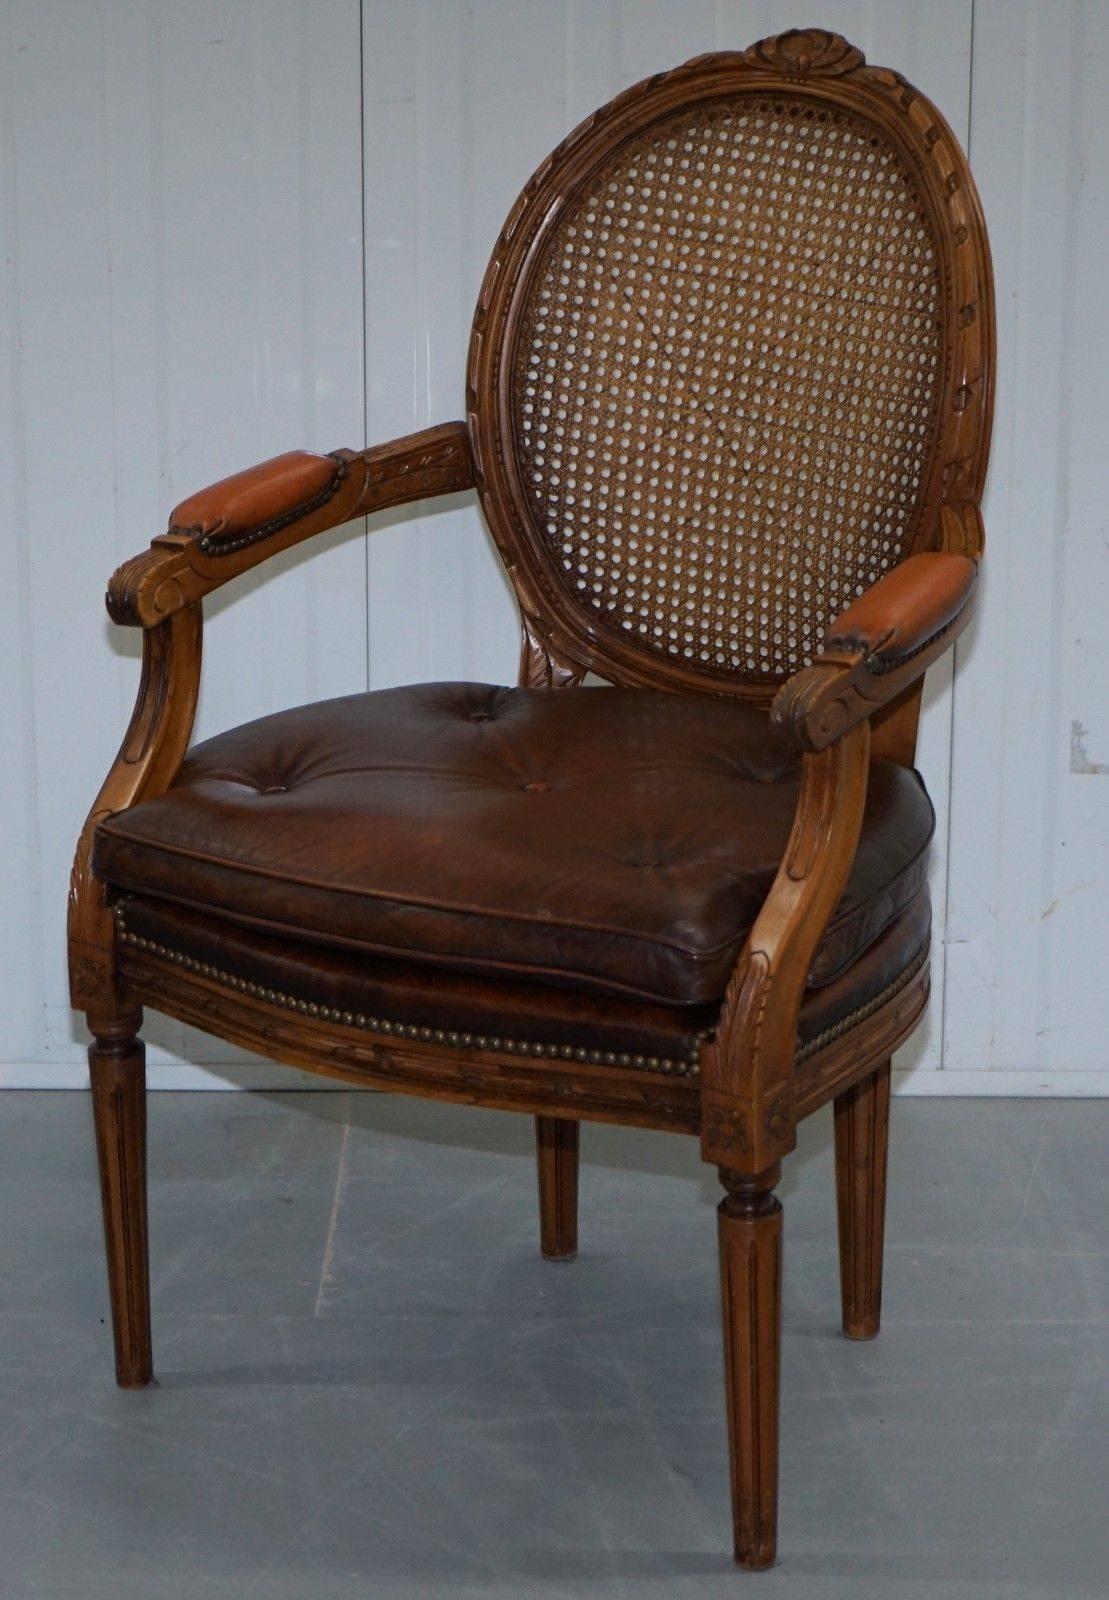 We are delighted to offer for sale this very nice pair of Dutch handmade rattan occasional chairs with aged brown leather upholstery

A very good looking and well-made pair, bought from an antique store in northeast Holland, the pair or in pretty